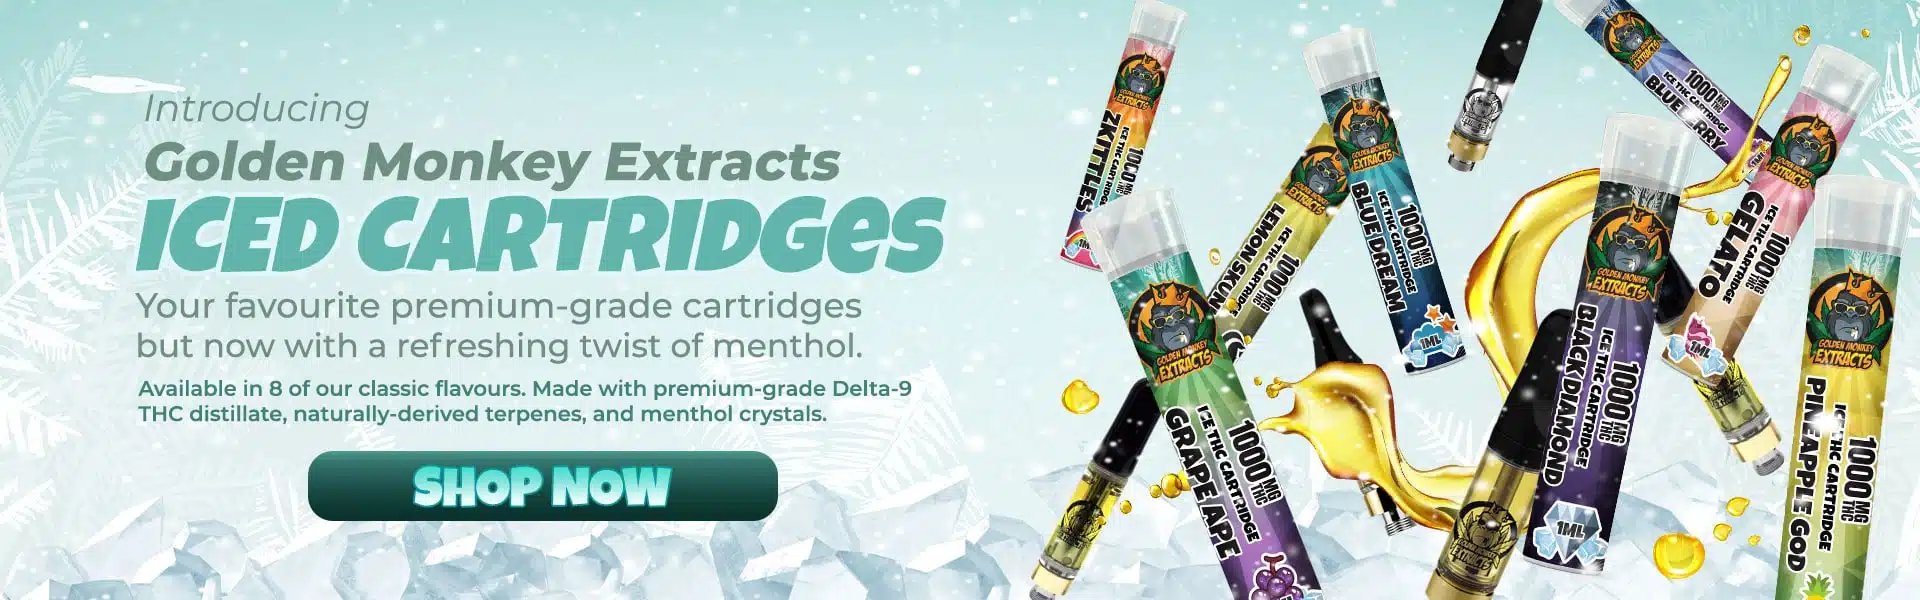 Gme iced cartridges banner 1920x600 1